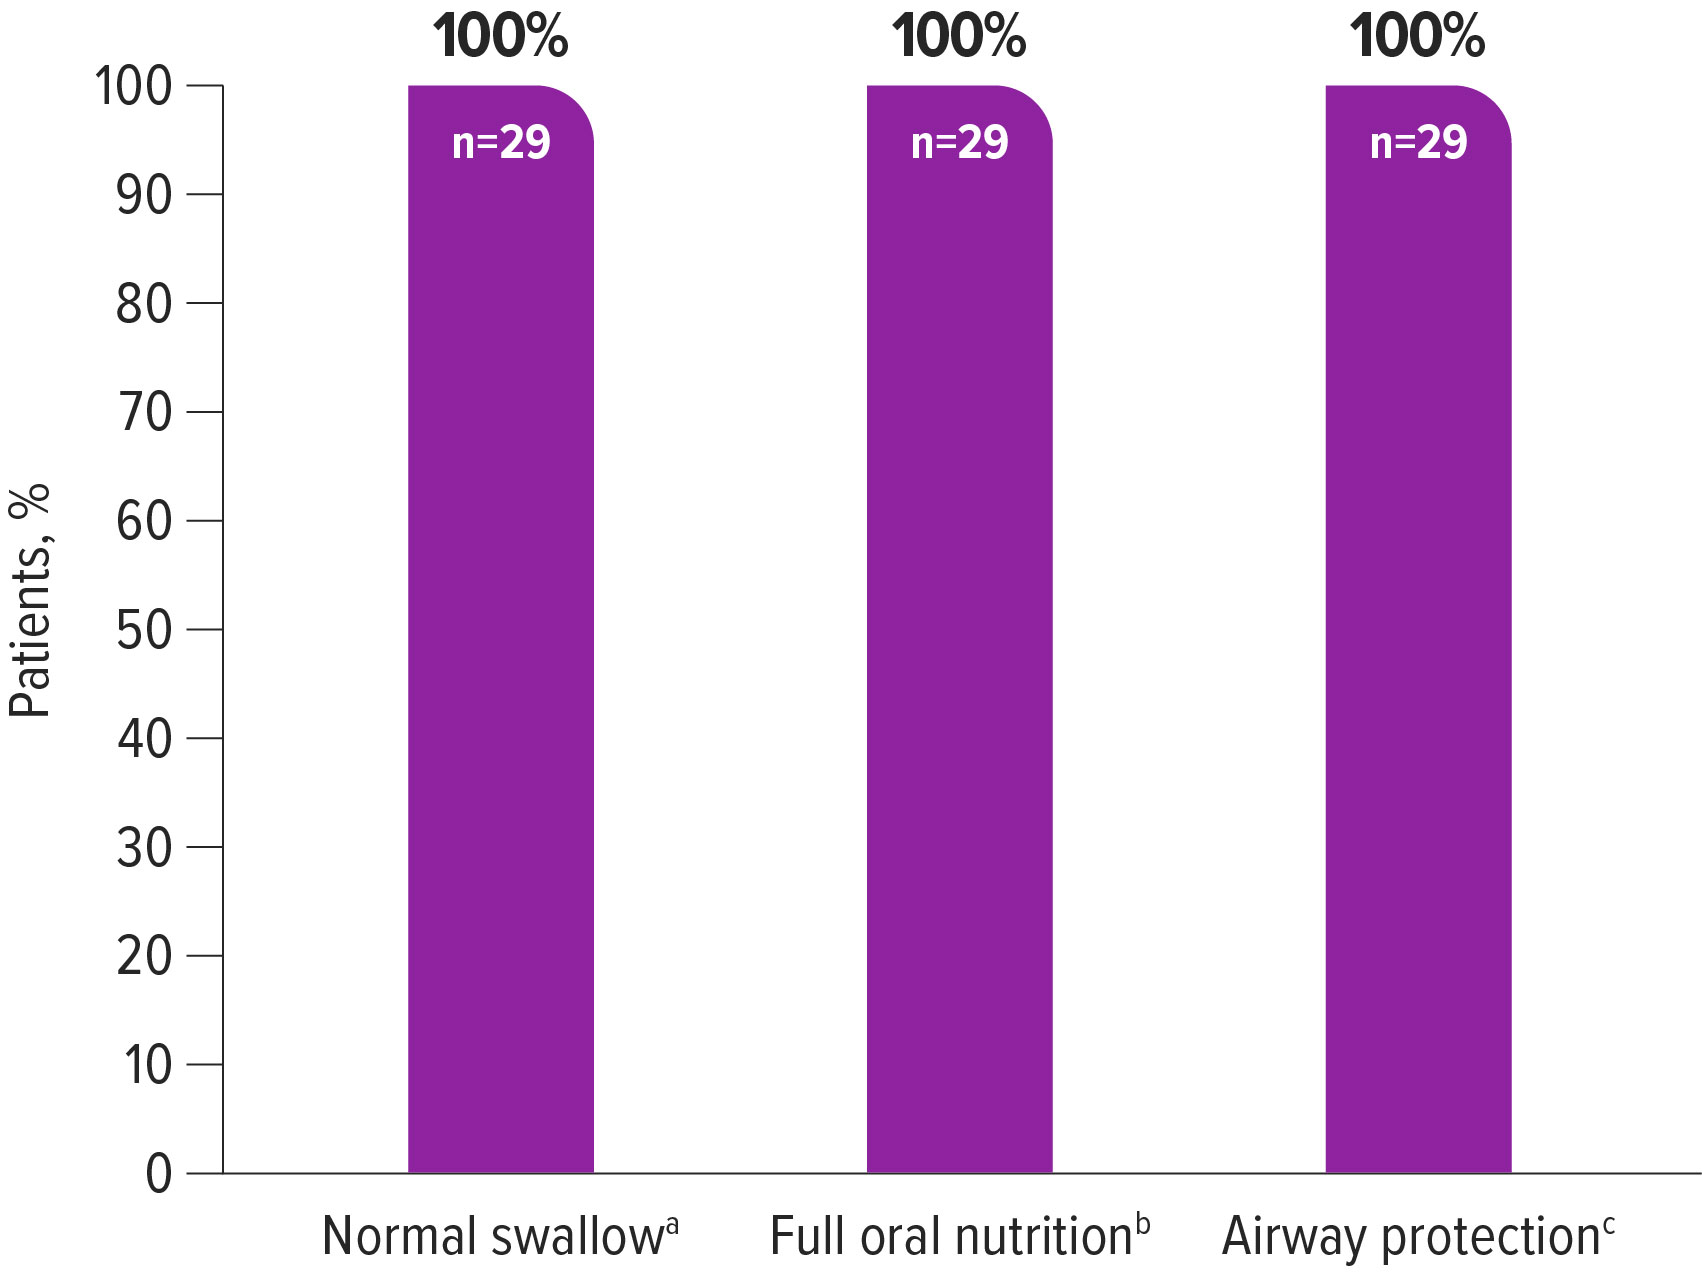 Chart: Components of bulbar function for presymptomatic patients in the SPR1NT trial, Including normal swallow, full oral nutrition, and airway protection